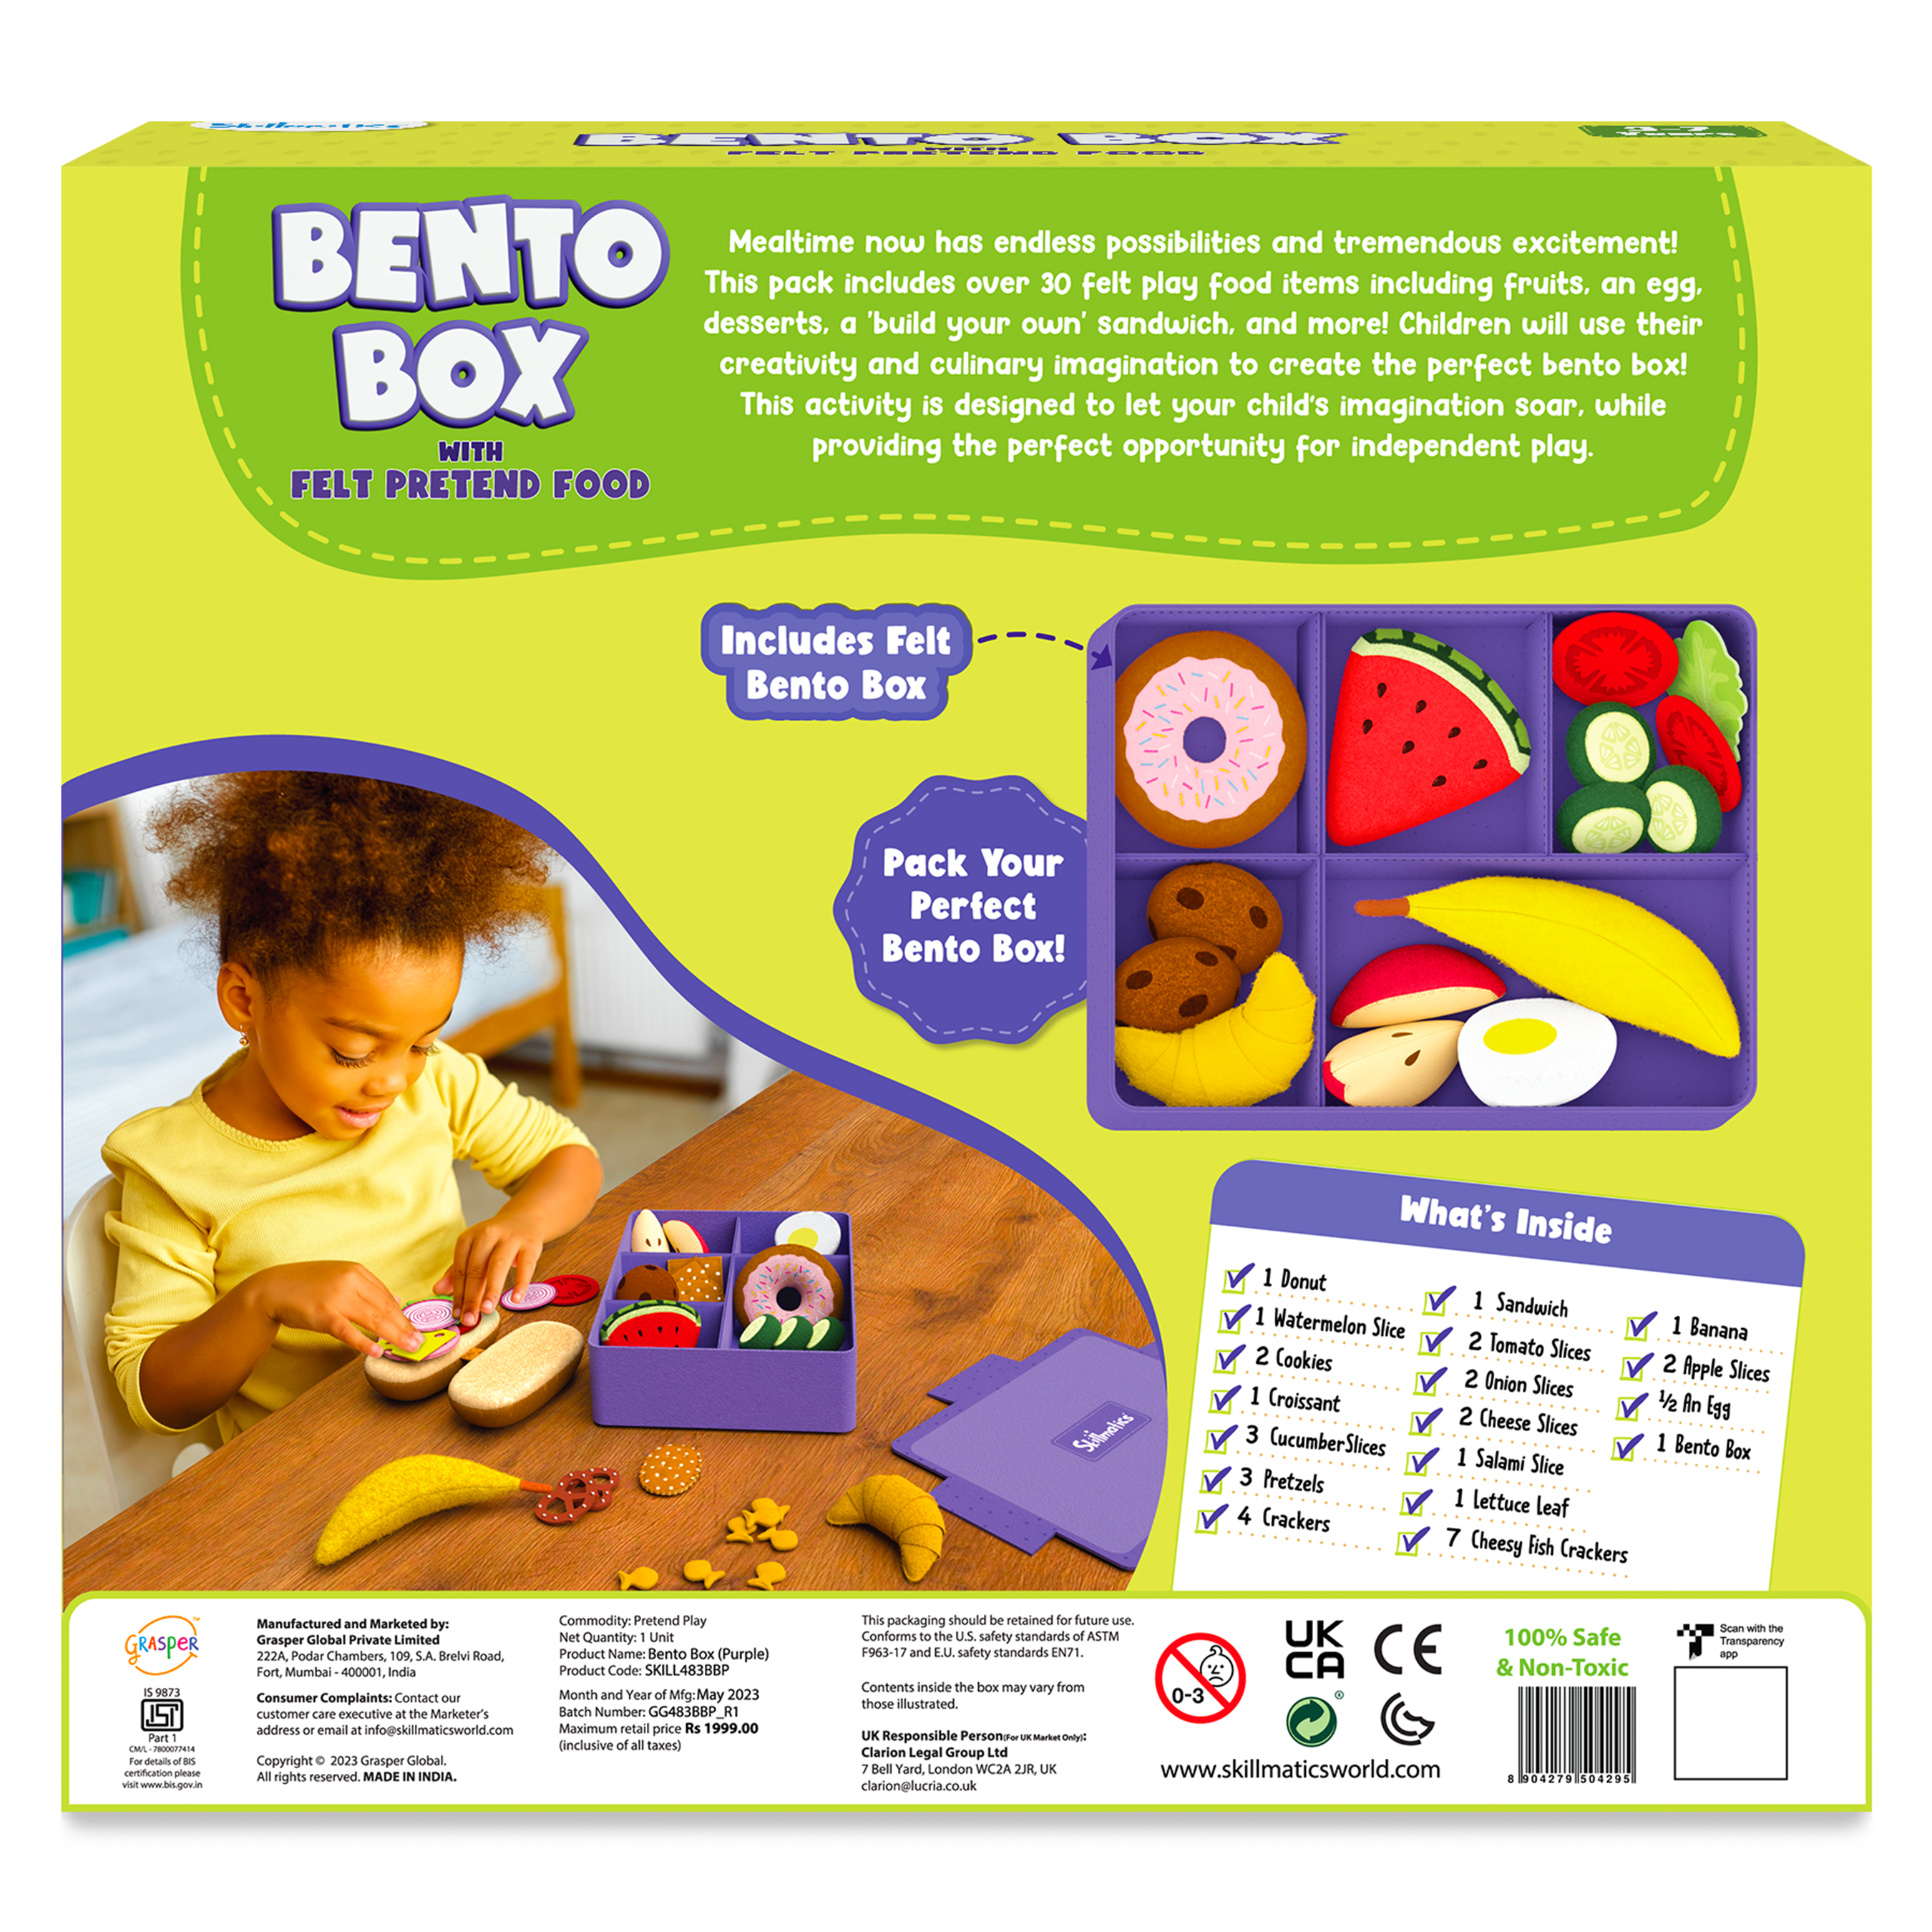 Skillmatics Bento Box - 35+ Felt Play Food Items, Pretend Play Kitchen Toys, Gifts For Kids Ages 3 To 7